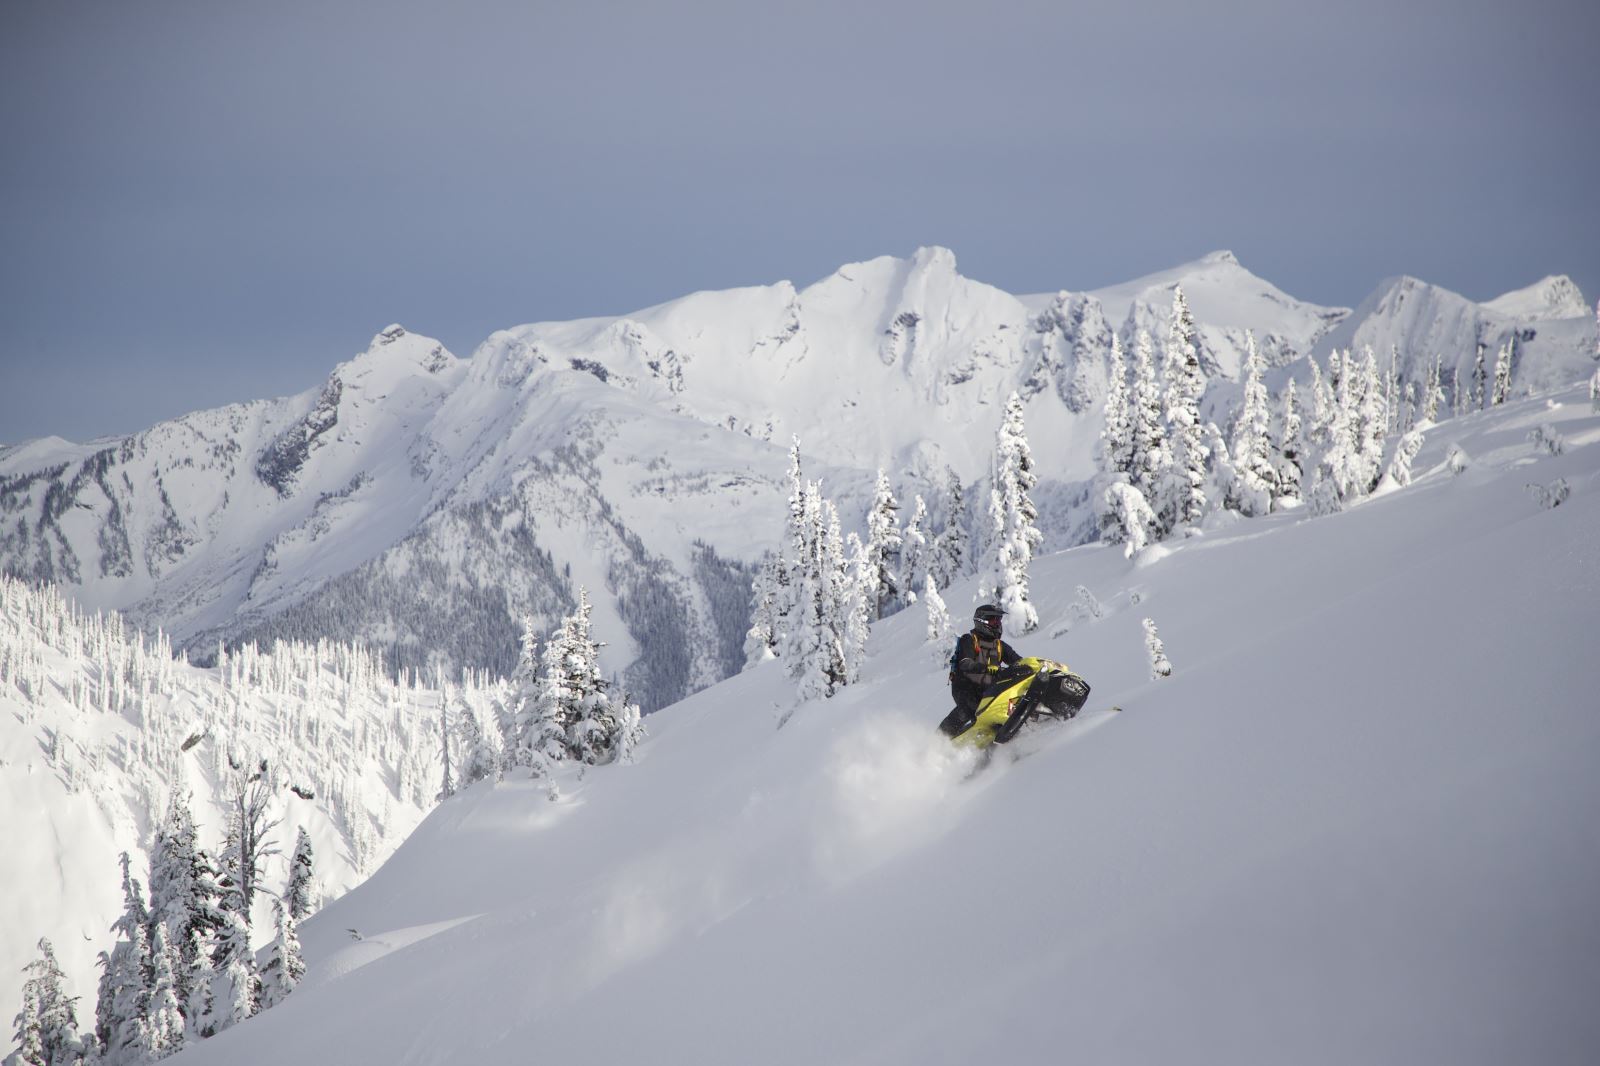 SKIDOO TEAMS UP WITH AVALANCHE ORGANIZATIONS TO FURTHER RIDER SAFETY